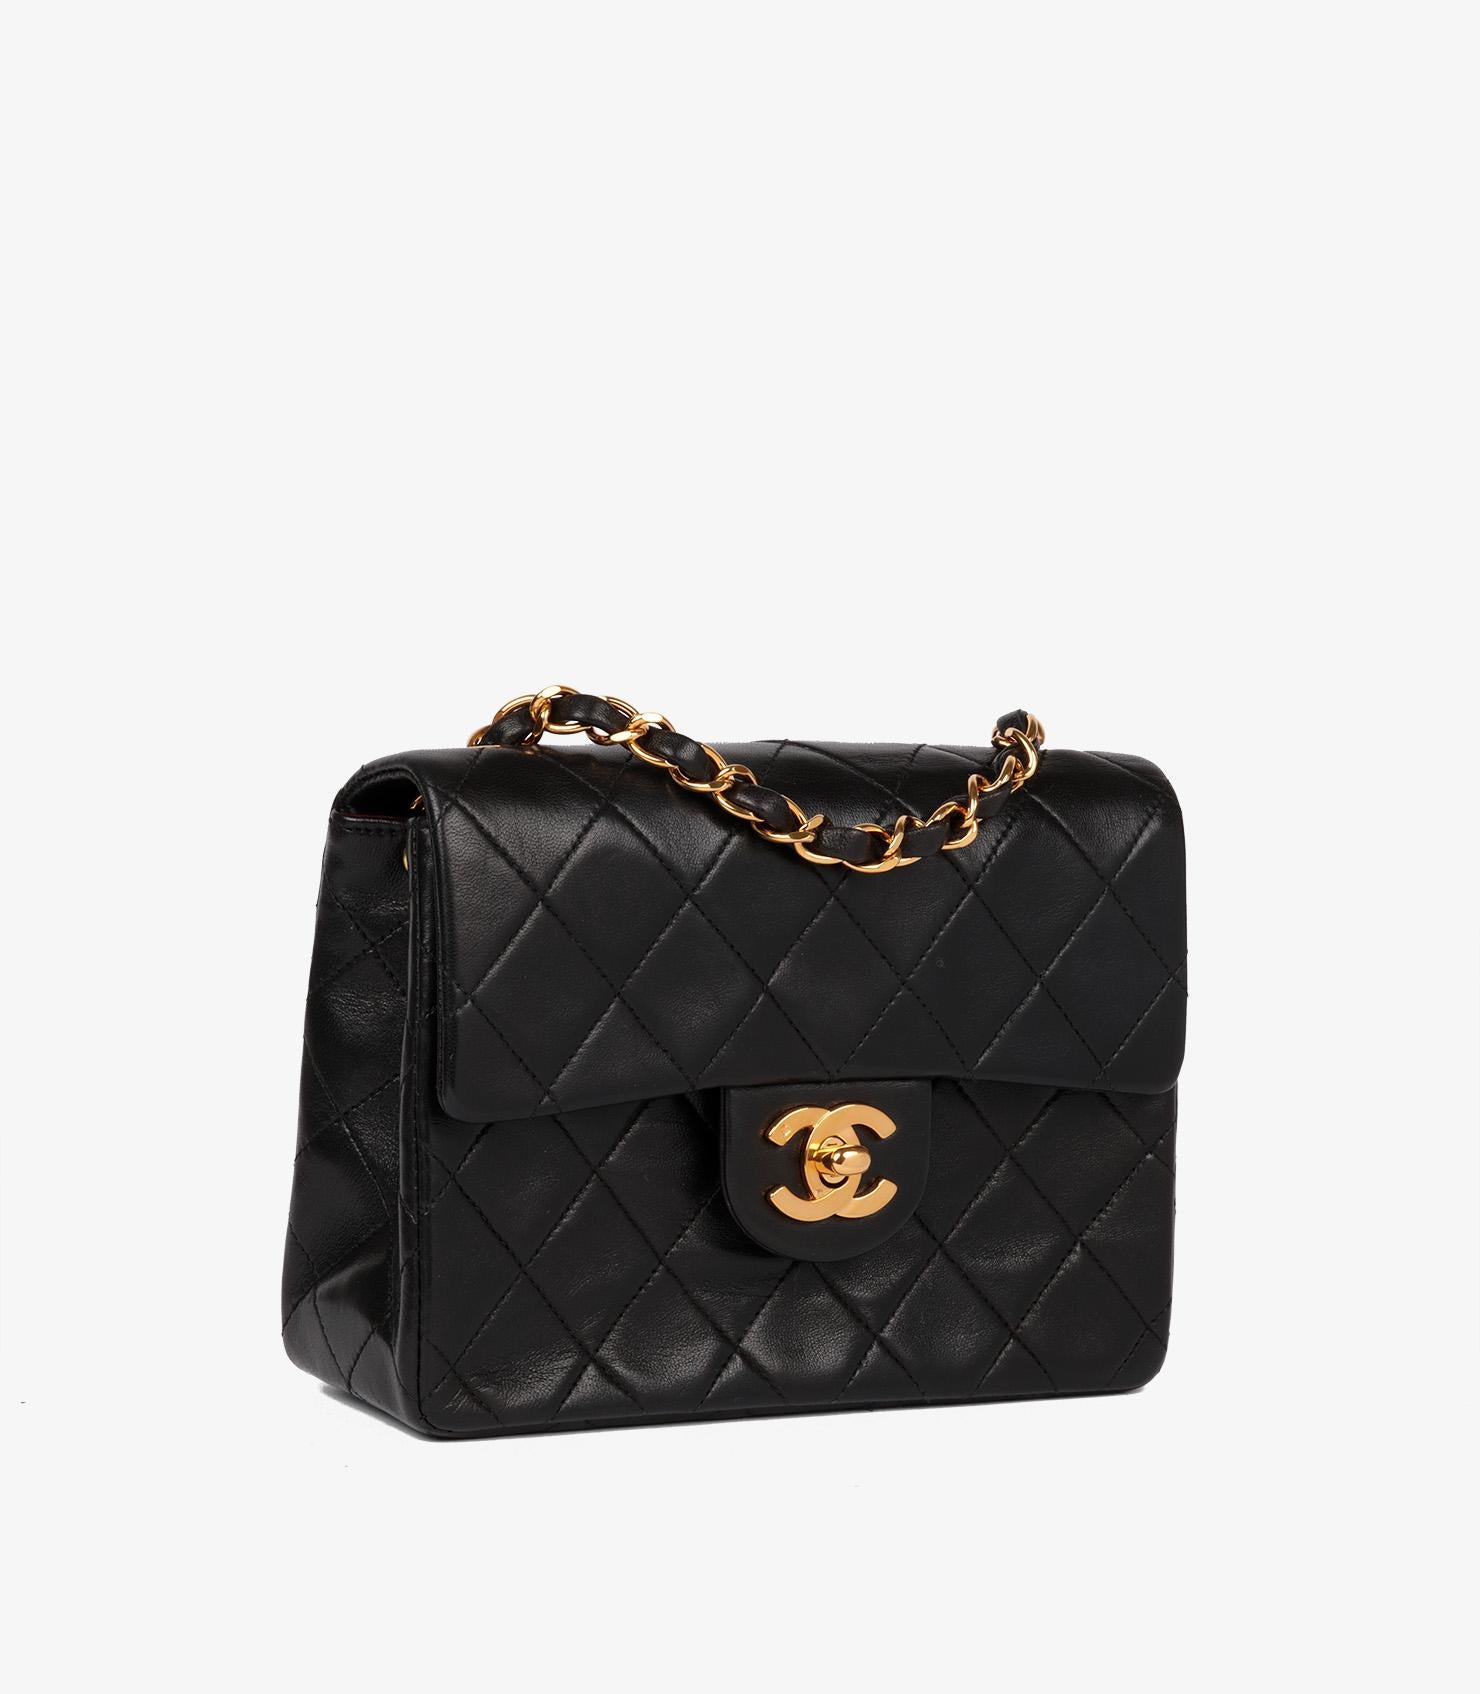 Chanel Black Quilted Lambskin Vintage Square Classic Mini Flap Bag

Brand- Chanel
Model- Square Mini Flap Bag
Product Type- Crossbody, Shoulder
Serial Number- 25*****
Age- Circa 1991
Accompanied By- Chanel Dust Bag, Authenticity Card
Colour-